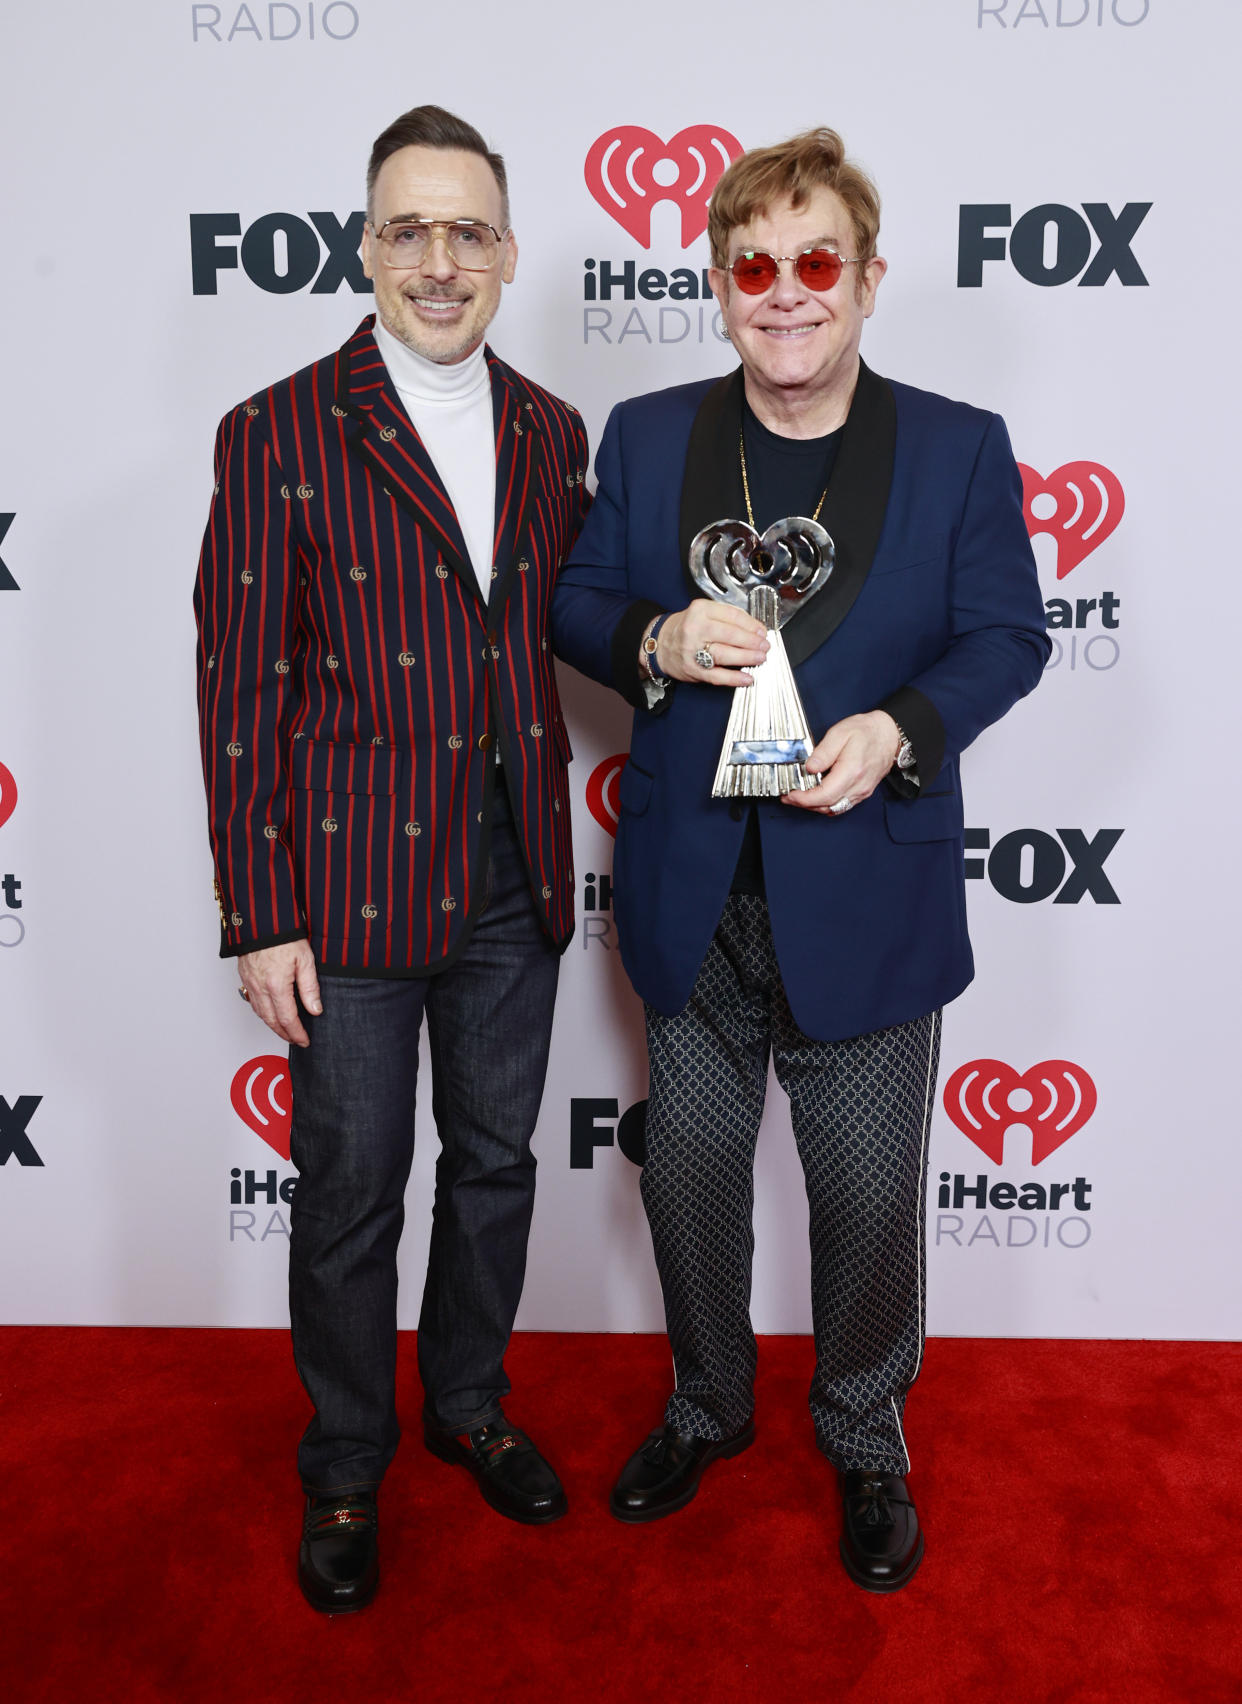 Sir Elton John and David Furnish married in 2014. (Photo by Emma McIntyre/Getty Images for iHeartMedia)